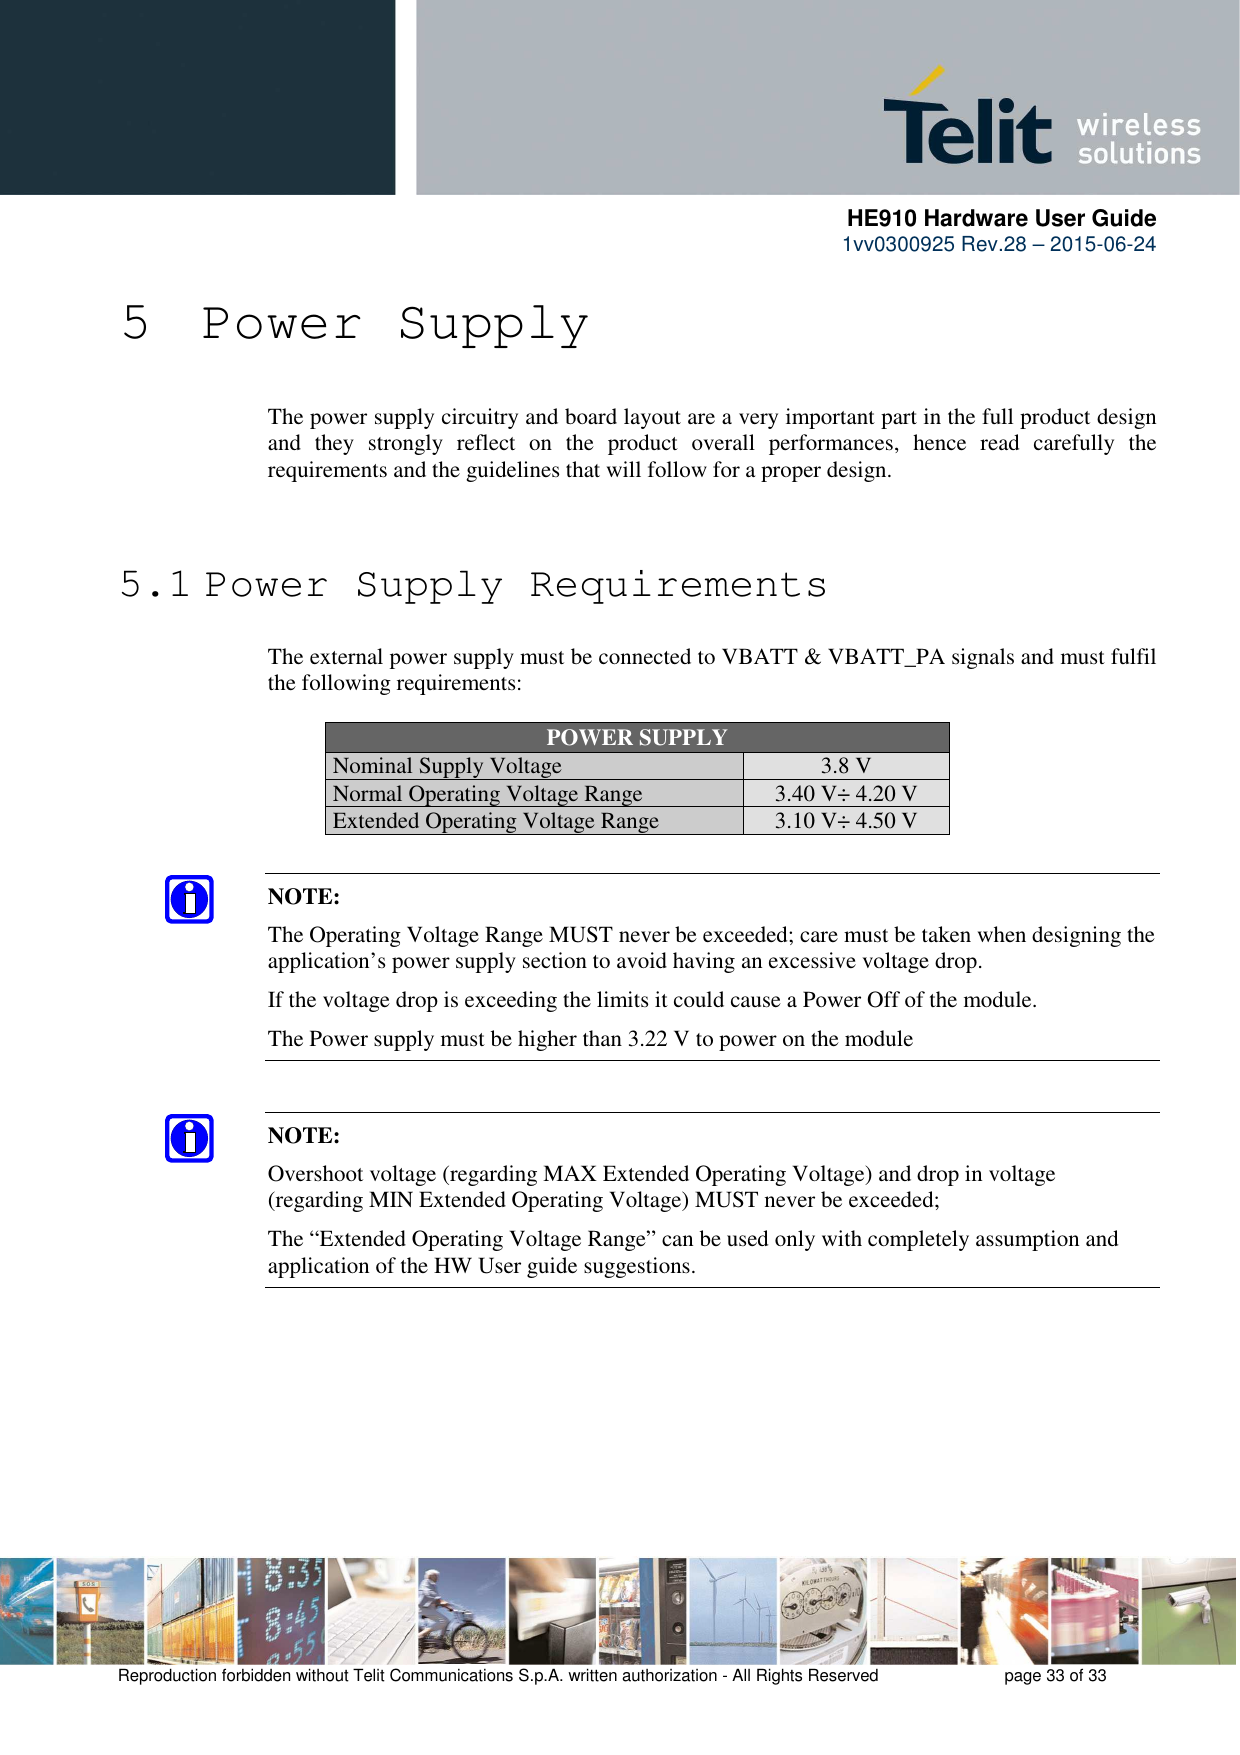      HE910 Hardware User Guide 1vv0300925 Rev.28 – 2015-06-24    Reproduction forbidden without Telit Communications S.p.A. written authorization - All Rights Reserved    page 33 of 33  5 Power Supply The power supply circuitry and board layout are a very important part in the full product design and  they  strongly  reflect  on  the  product  overall  performances,  hence  read  carefully  the requirements and the guidelines that will follow for a proper design.   5.1 Power Supply Requirements The external power supply must be connected to VBATT &amp; VBATT_PA signals and must fulfil the following requirements:  POWER SUPPLY Nominal Supply Voltage 3.8 V Normal Operating Voltage Range 3.40 V÷ 4.20 V Extended Operating Voltage Range 3.10 V÷ 4.50 V  NOTE: The Operating Voltage Range MUST never be exceeded; care must be taken when designing the application’s power supply section to avoid having an excessive voltage drop.  If the voltage drop is exceeding the limits it could cause a Power Off of the module. The Power supply must be higher than 3.22 V to power on the module  NOTE: Overshoot voltage (regarding MAX Extended Operating Voltage) and drop in voltage (regarding MIN Extended Operating Voltage) MUST never be exceeded;  The “Extended Operating Voltage Range” can be used only with completely assumption and application of the HW User guide suggestions.   